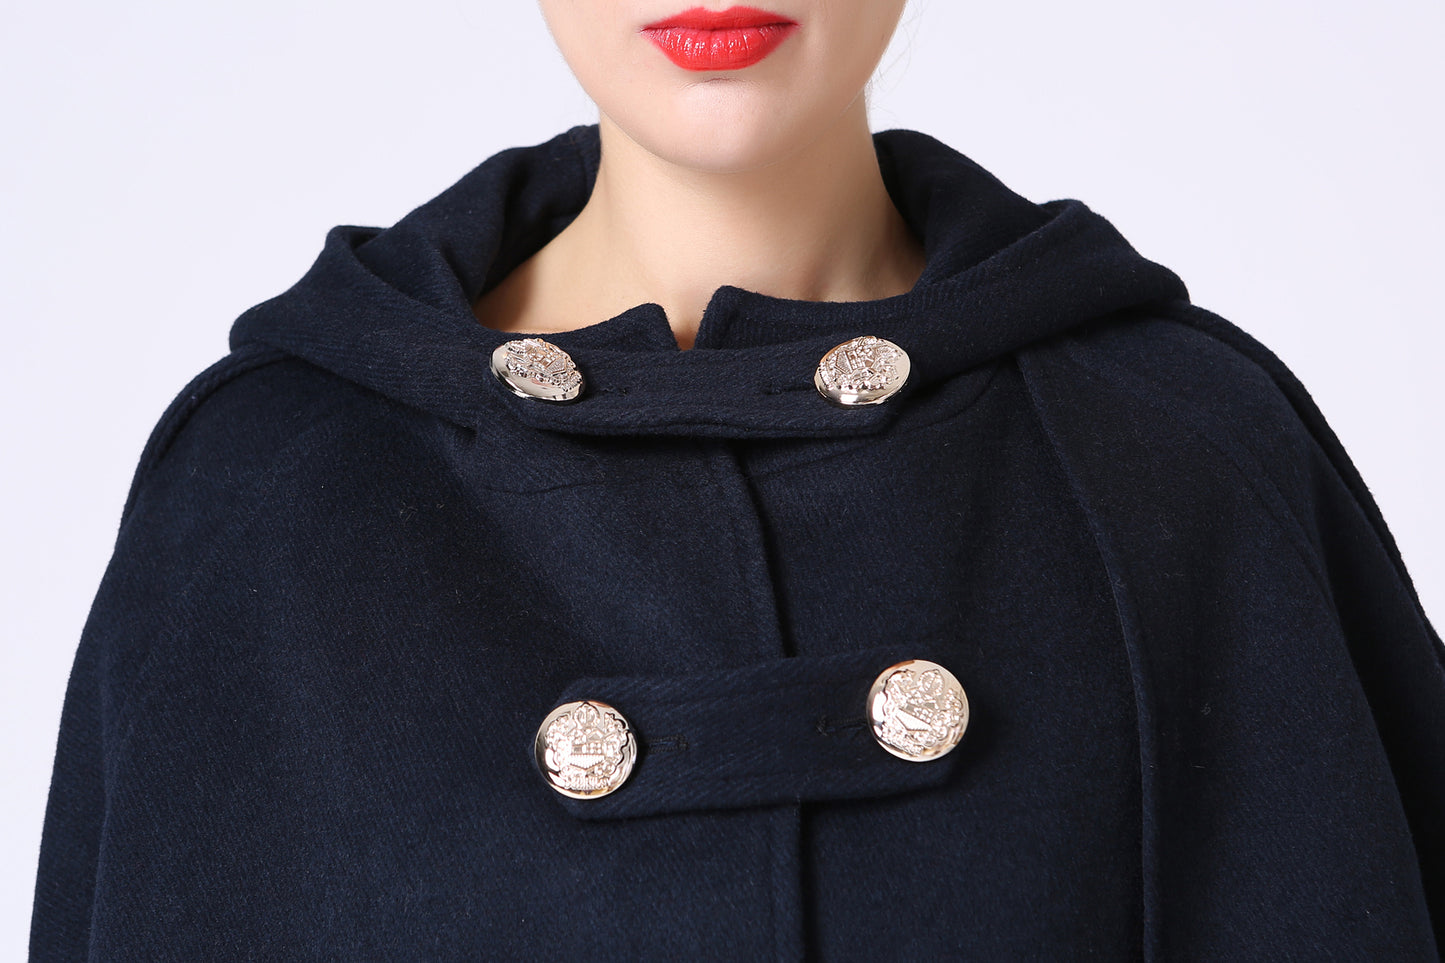 Double breasted wool cape coat with hood 1057#